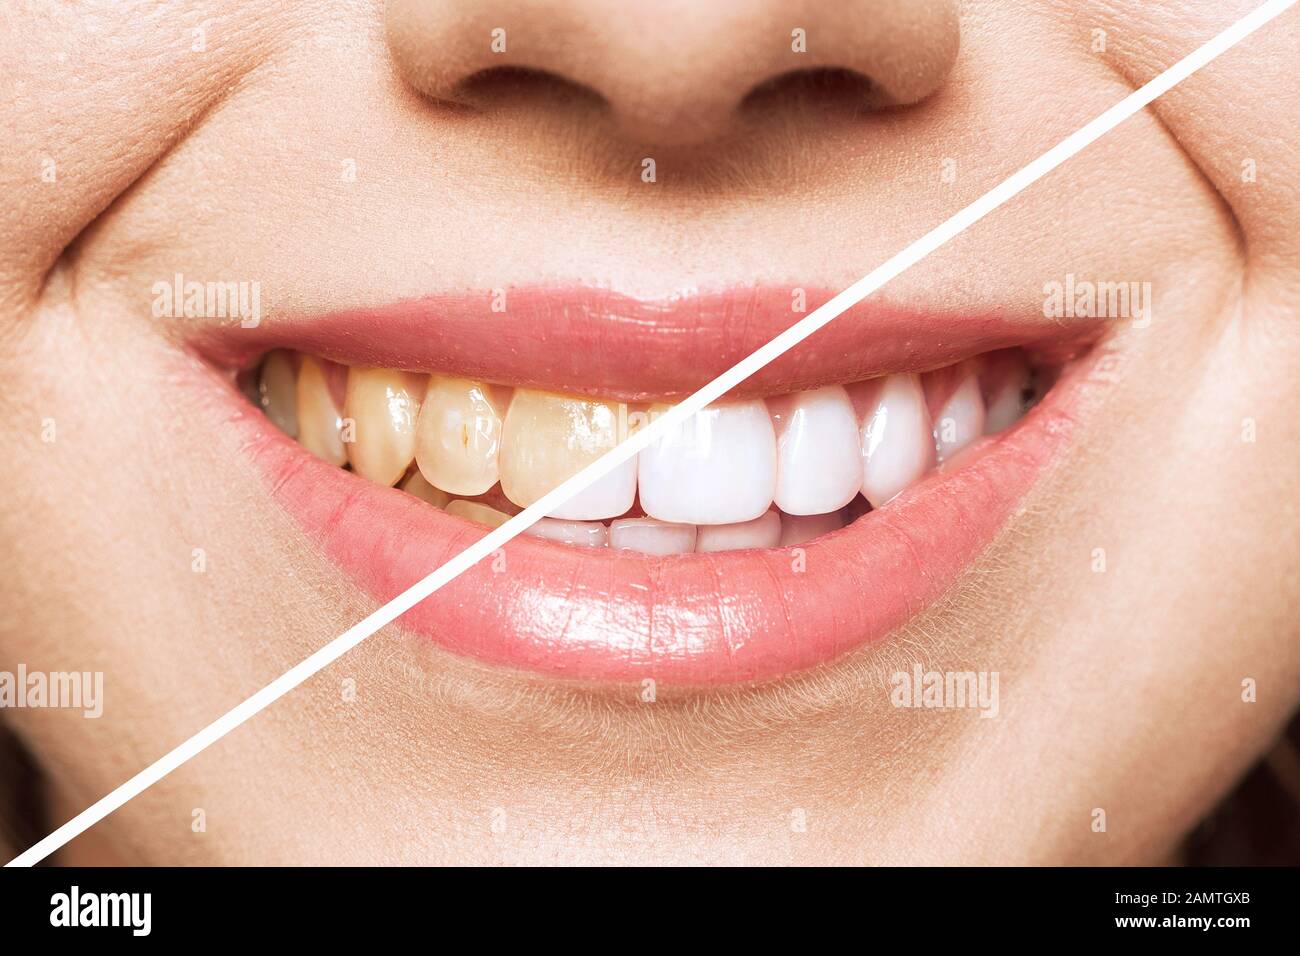 woman teeth before and after whitening. Over white background. Dental clinic patient. Image symbolizes oral care dentistry, stomatology Stock Photo